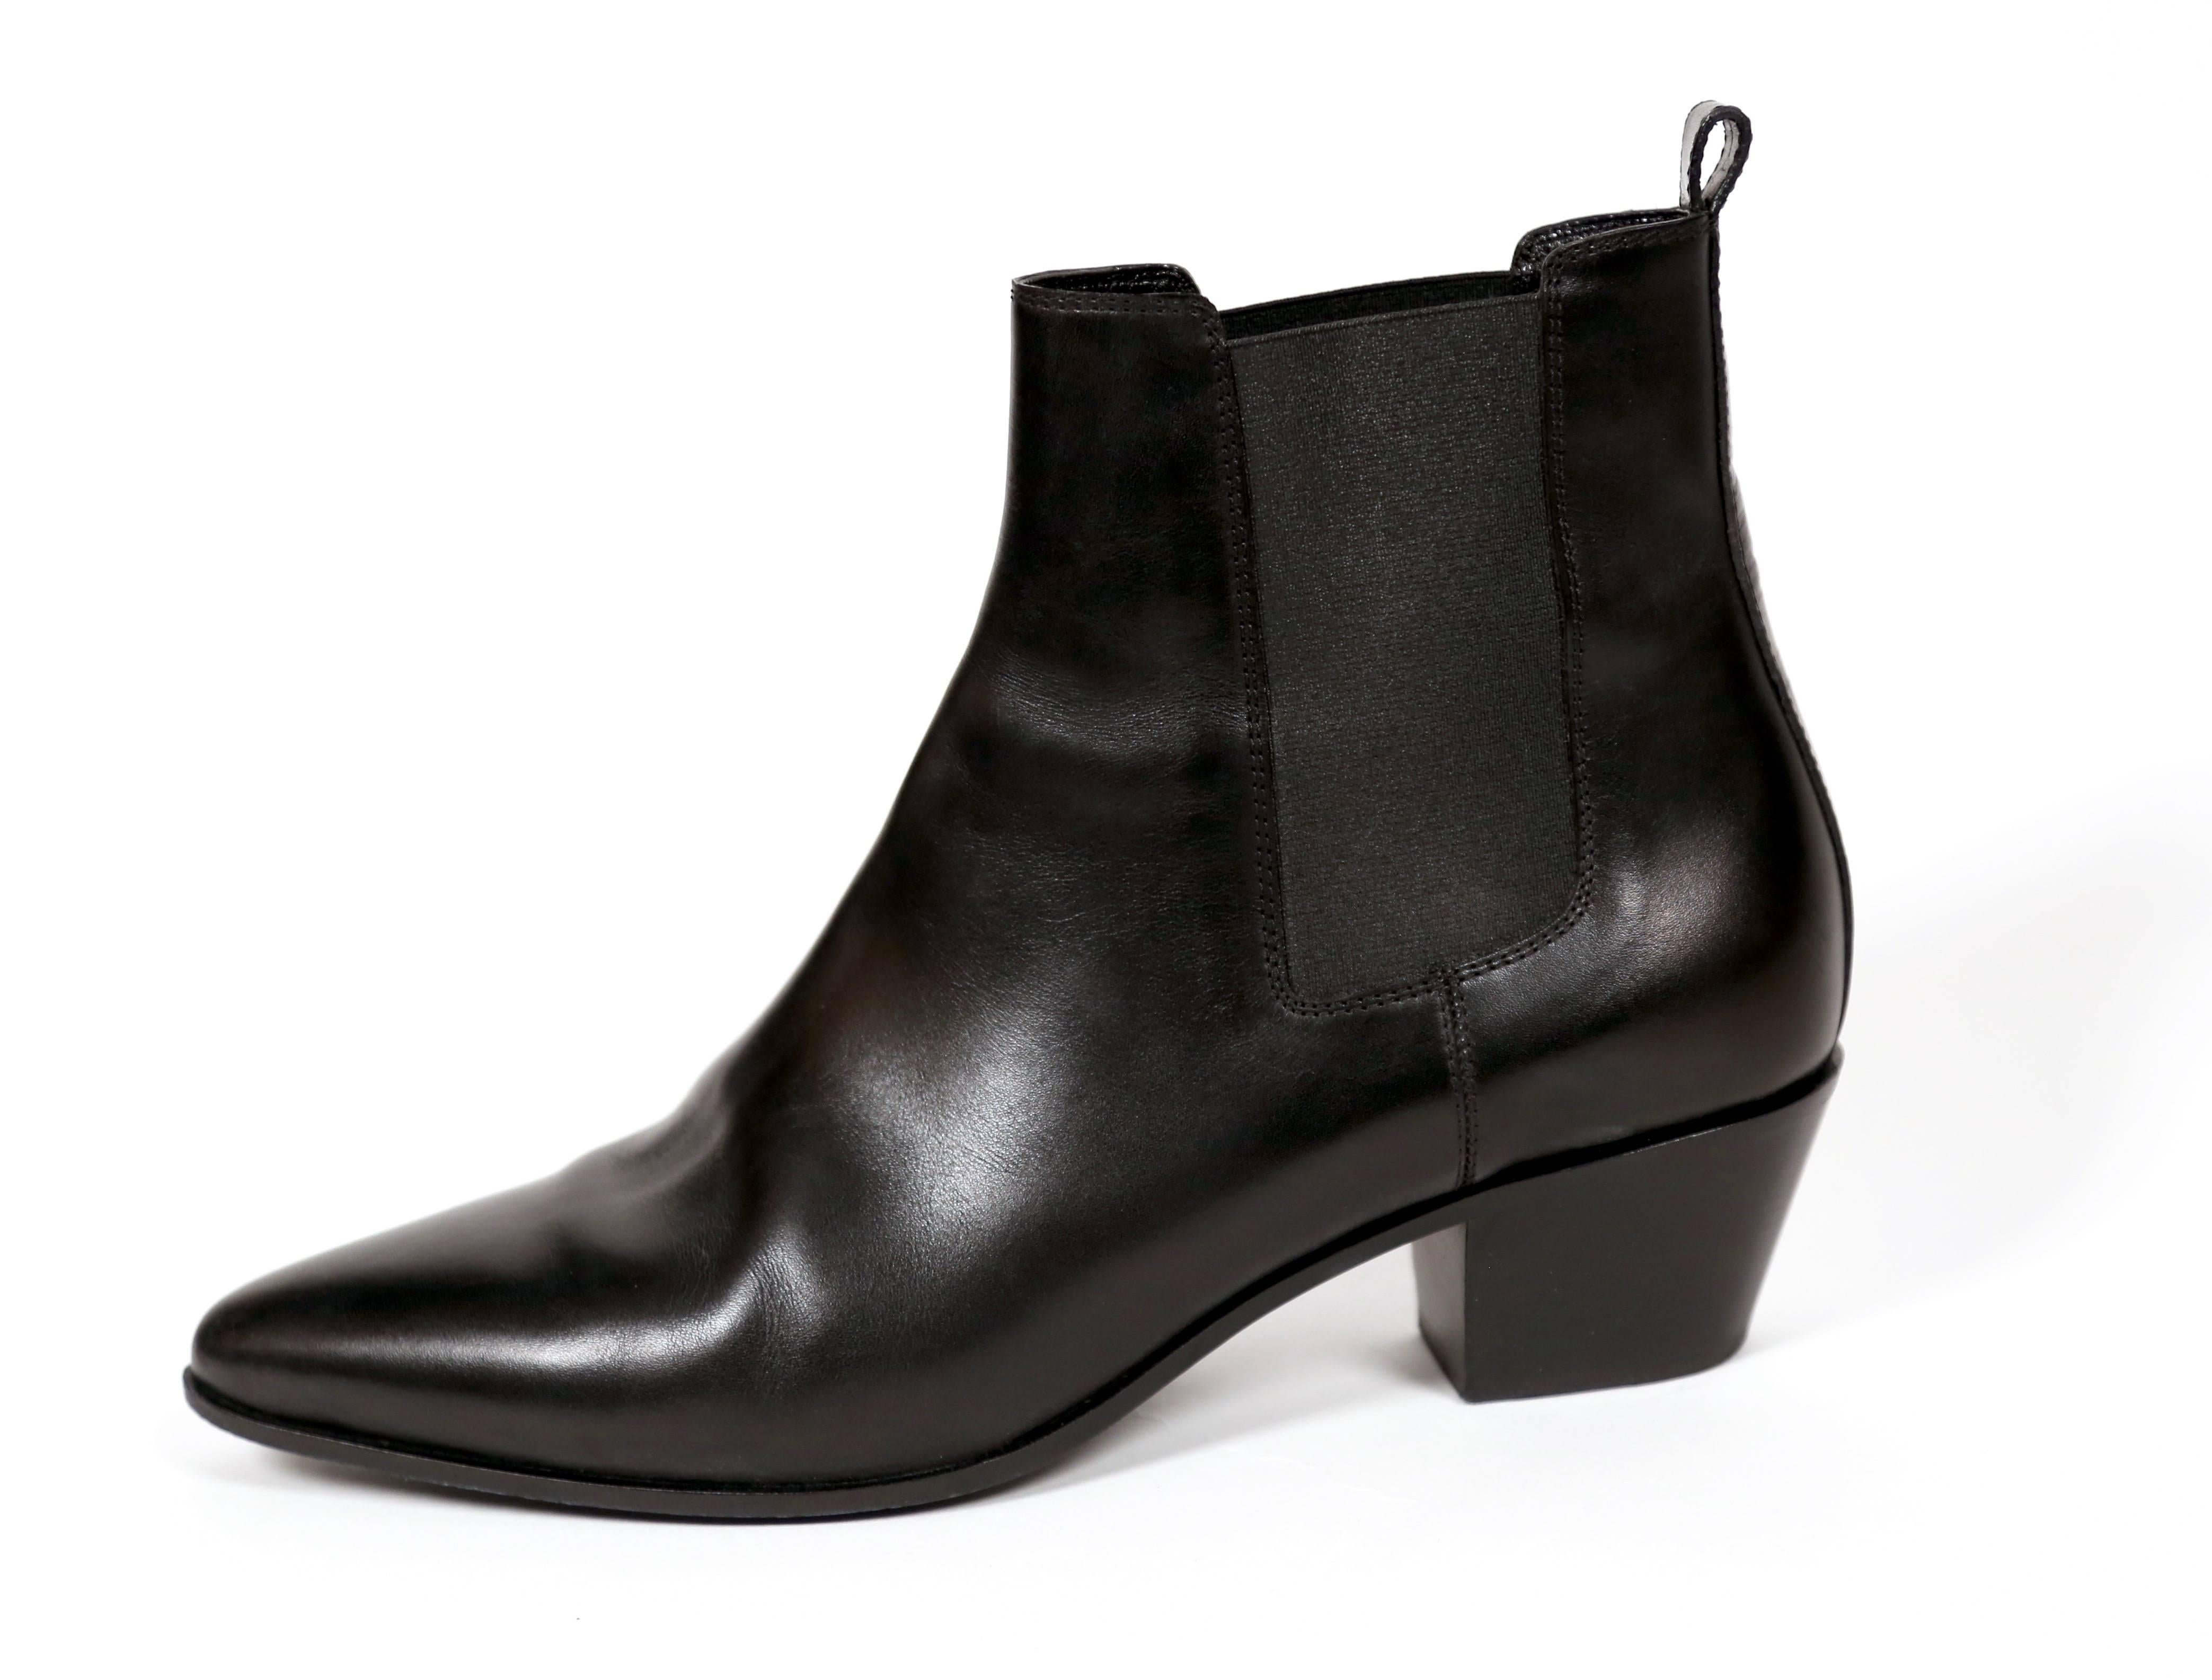 Jet black leather 'Rock 40' Chelsea boots 41 by Saint Laurent. French size 41. Heel height 1.6